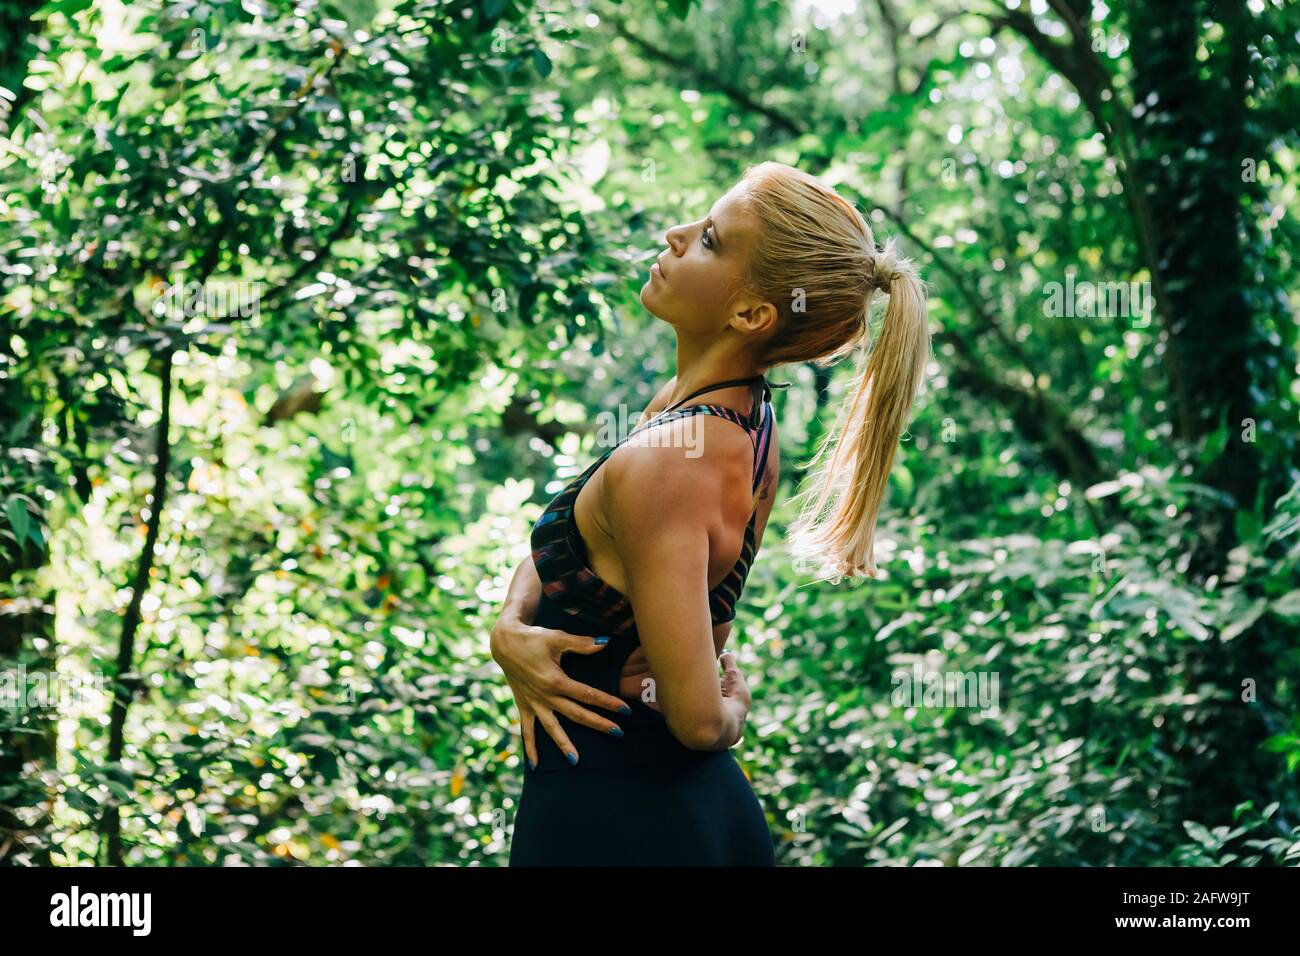 Fit female personal trainer stretching in forest Stock Photo